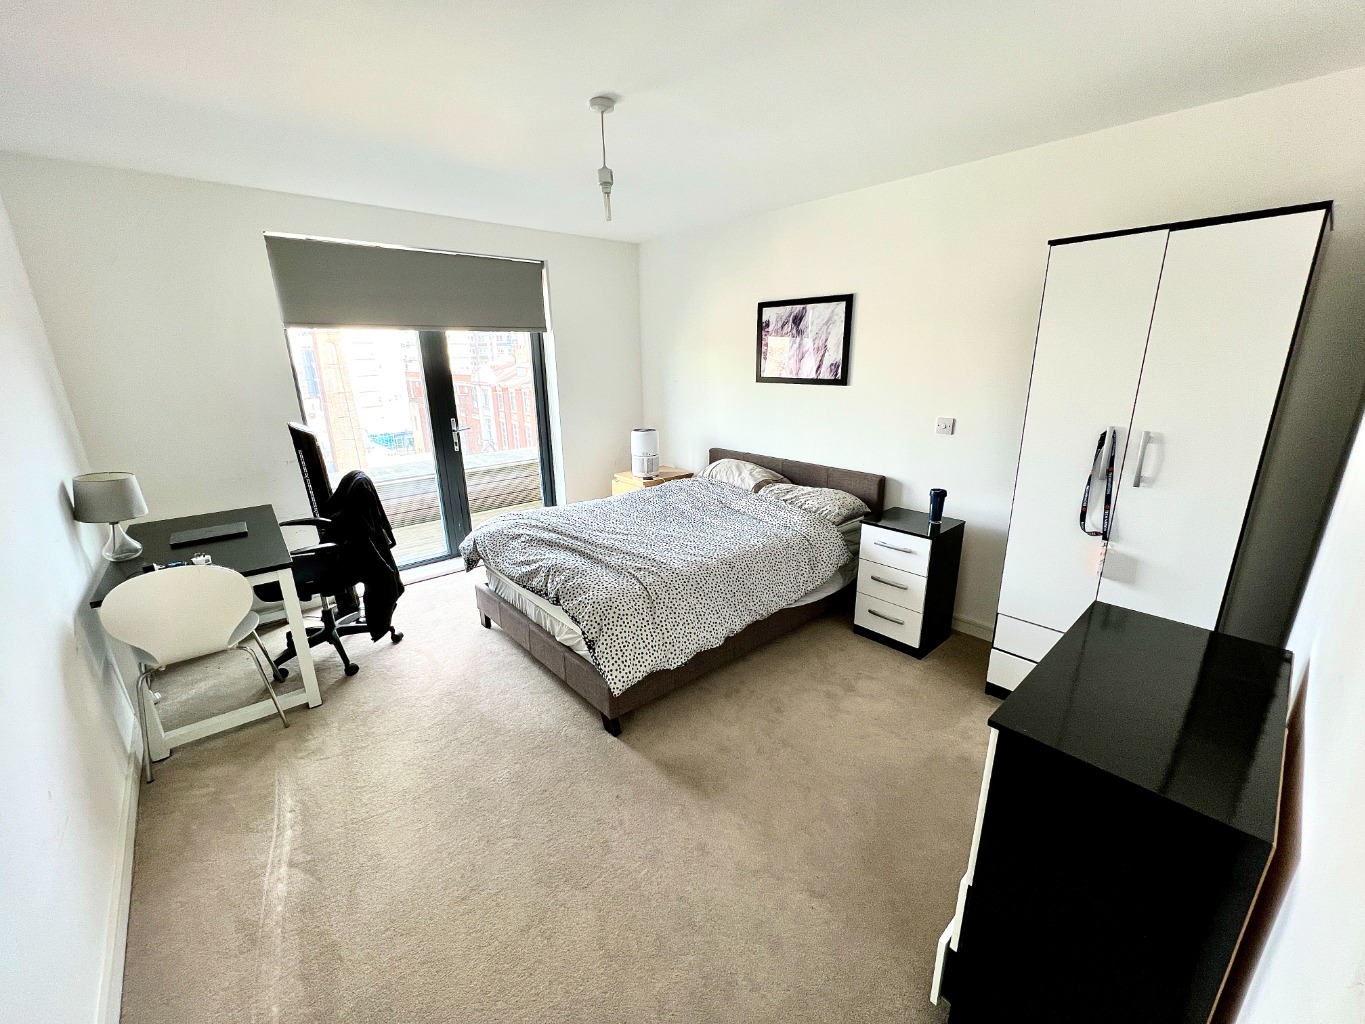 Beaumont Gibbs are offering this very spacious one bedroomed 4th floor balcony flat for rent in the centre of Woolwich, London, SE18. The flat comes fully furnished and benefits from having a lift service, secure bike lock up and being close by to all local transportation.